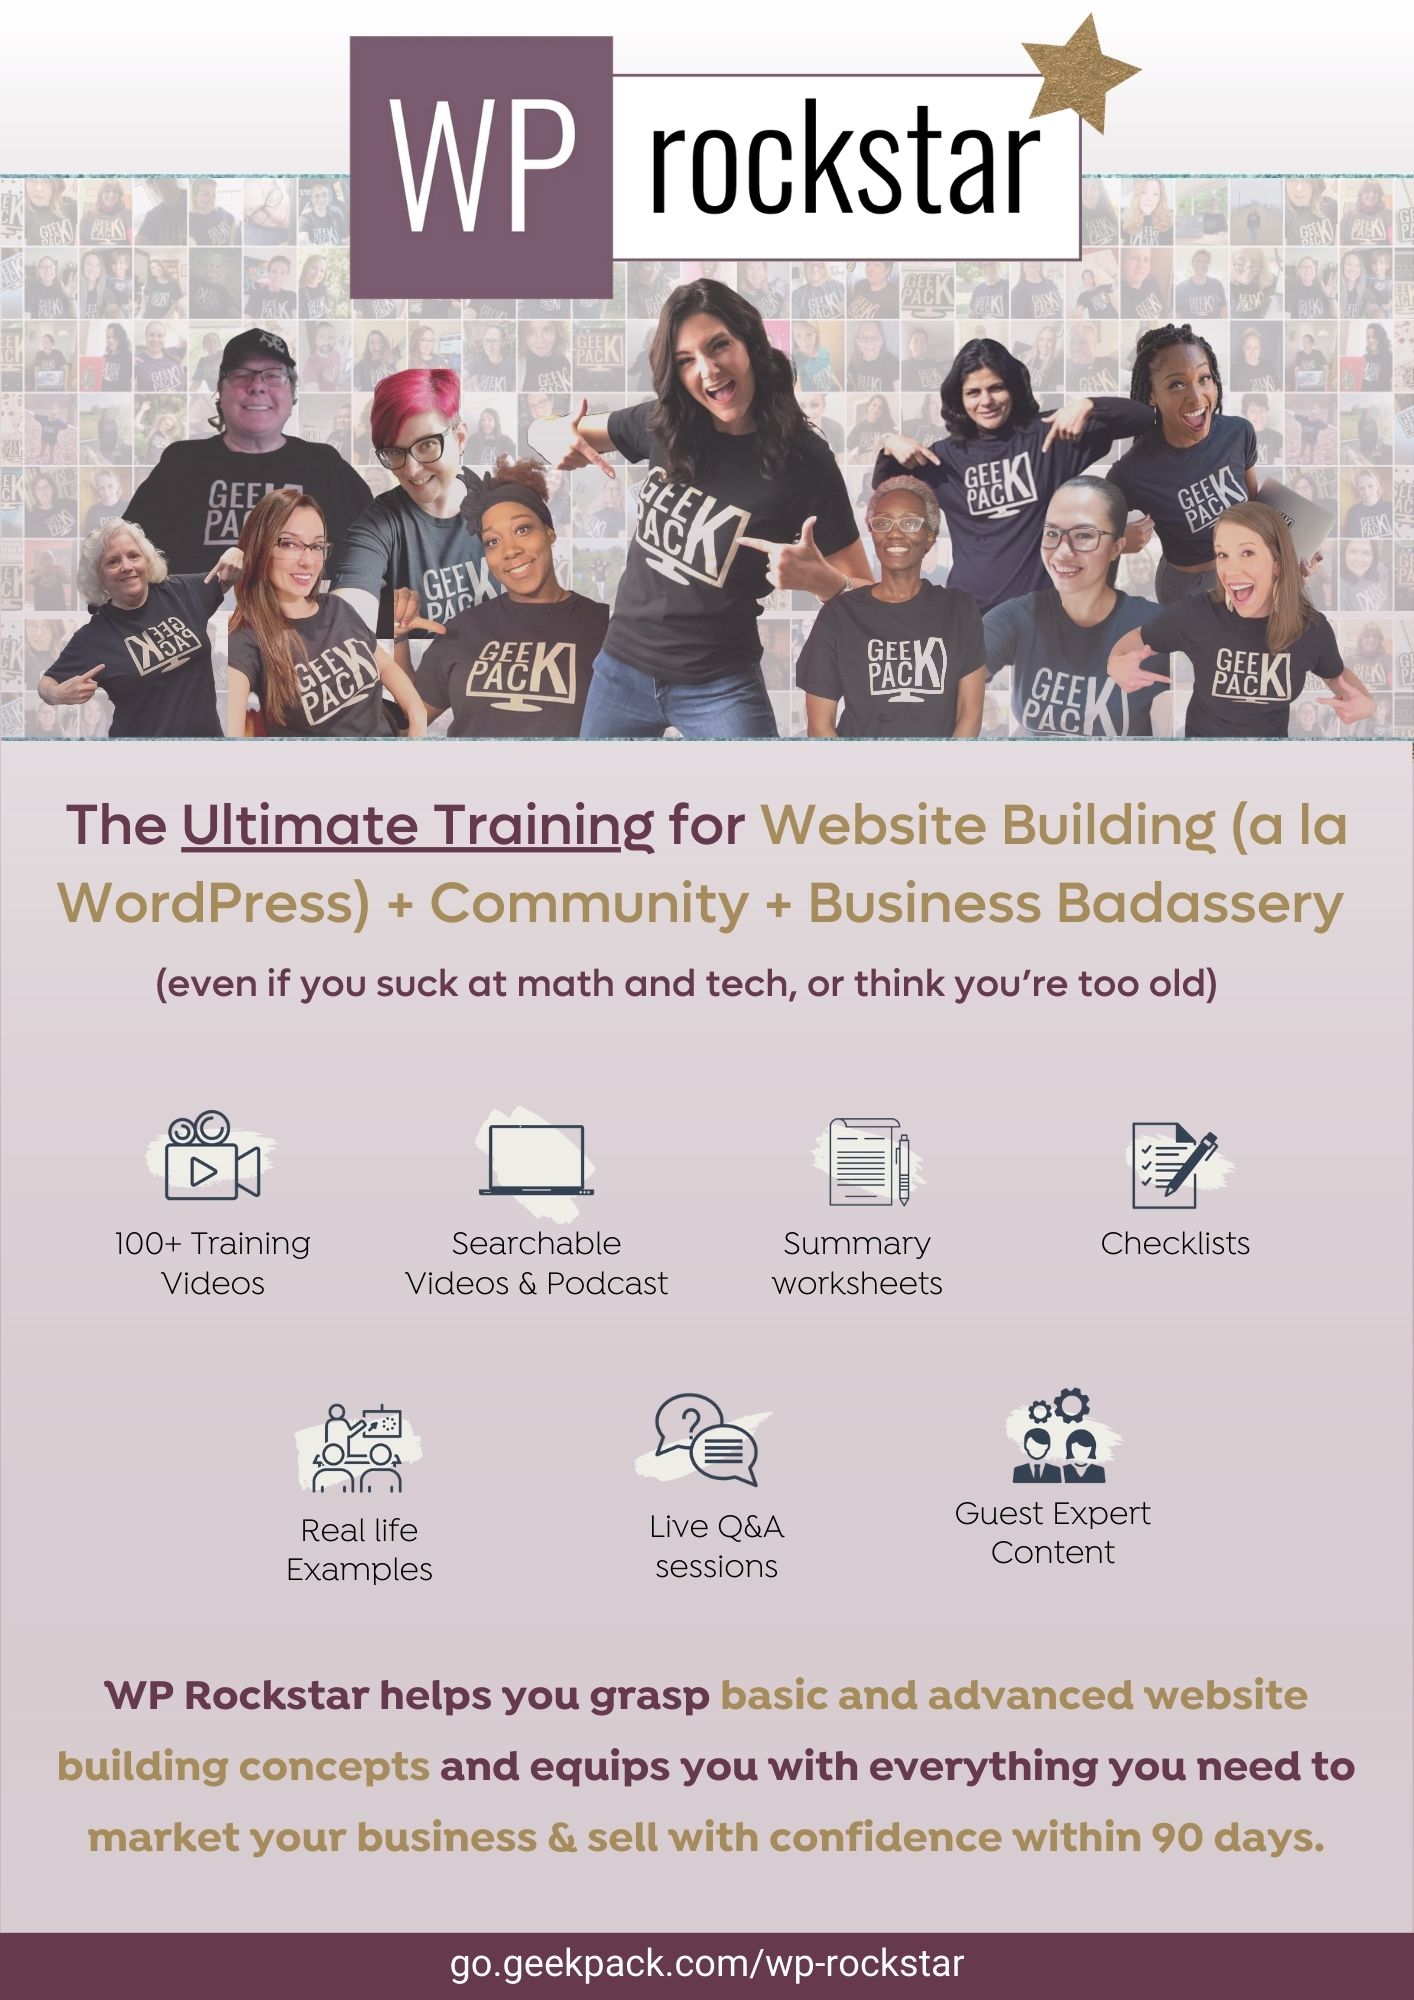 Wp rockstar, the ultimate training for website building with WordPress.